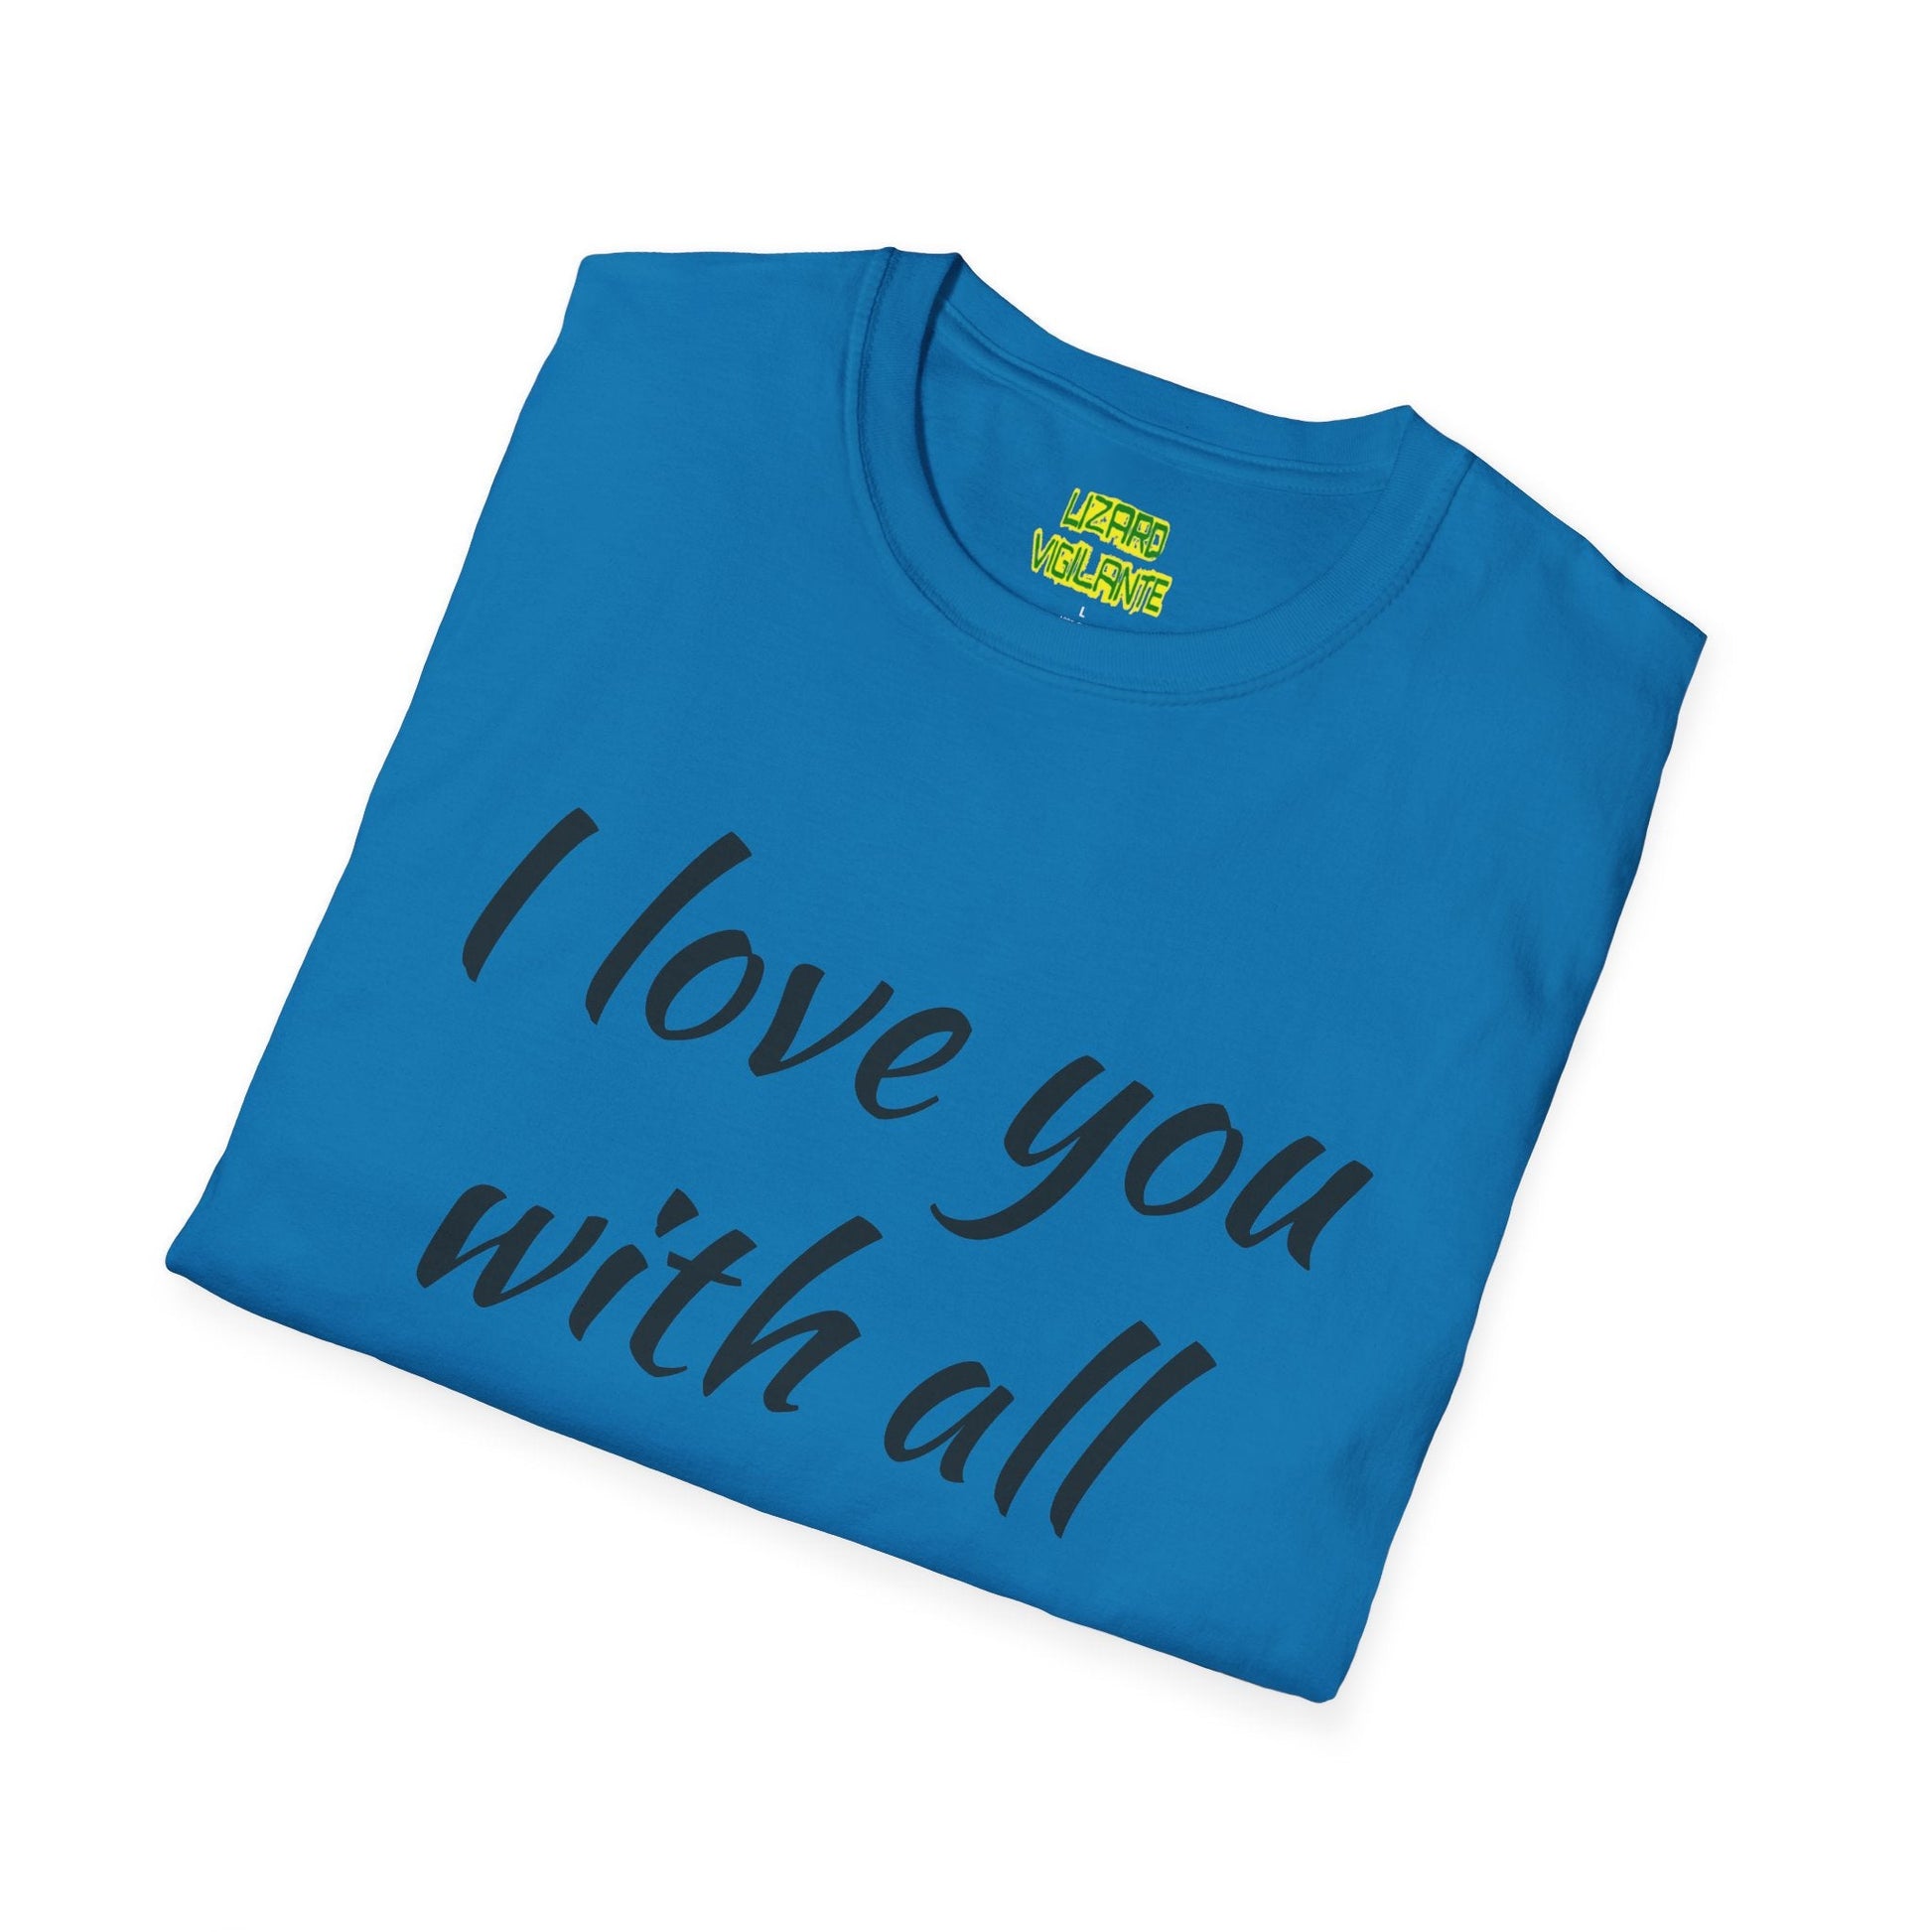 Valentine’s Day I love you with all my butt Unisex Softstyle T-Shirt Holiday or Anyday Tee - Lizard Vigilante